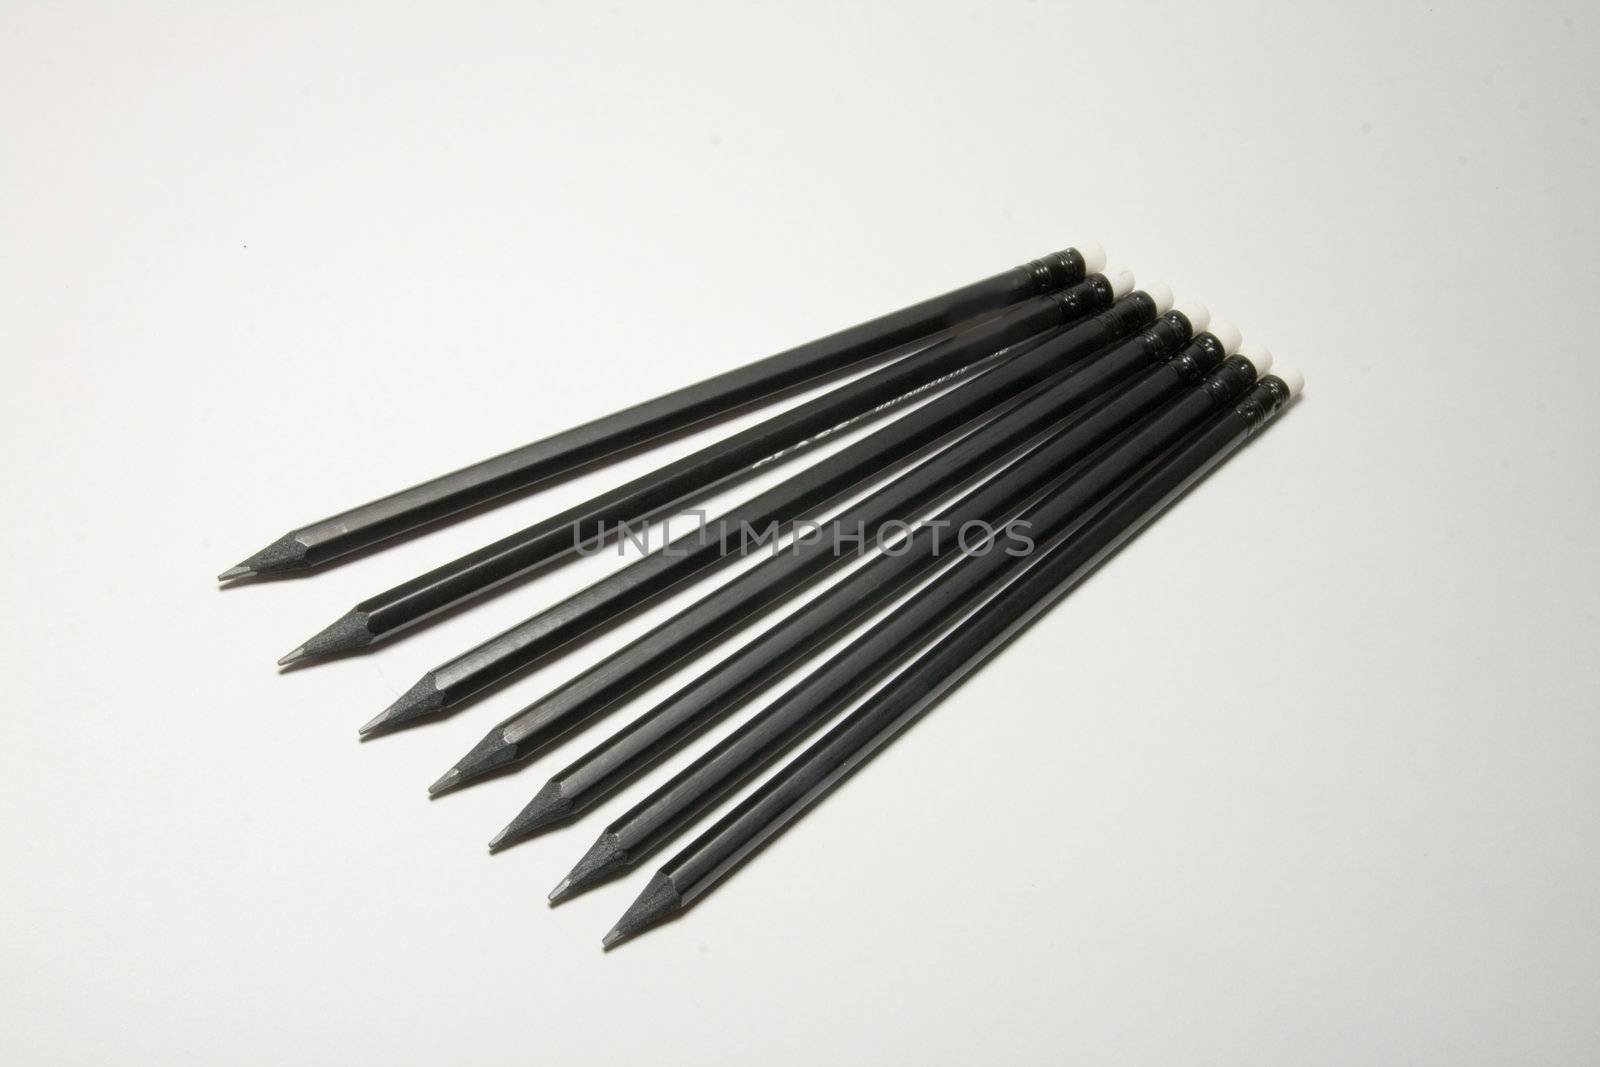 Many black pencils on a white background